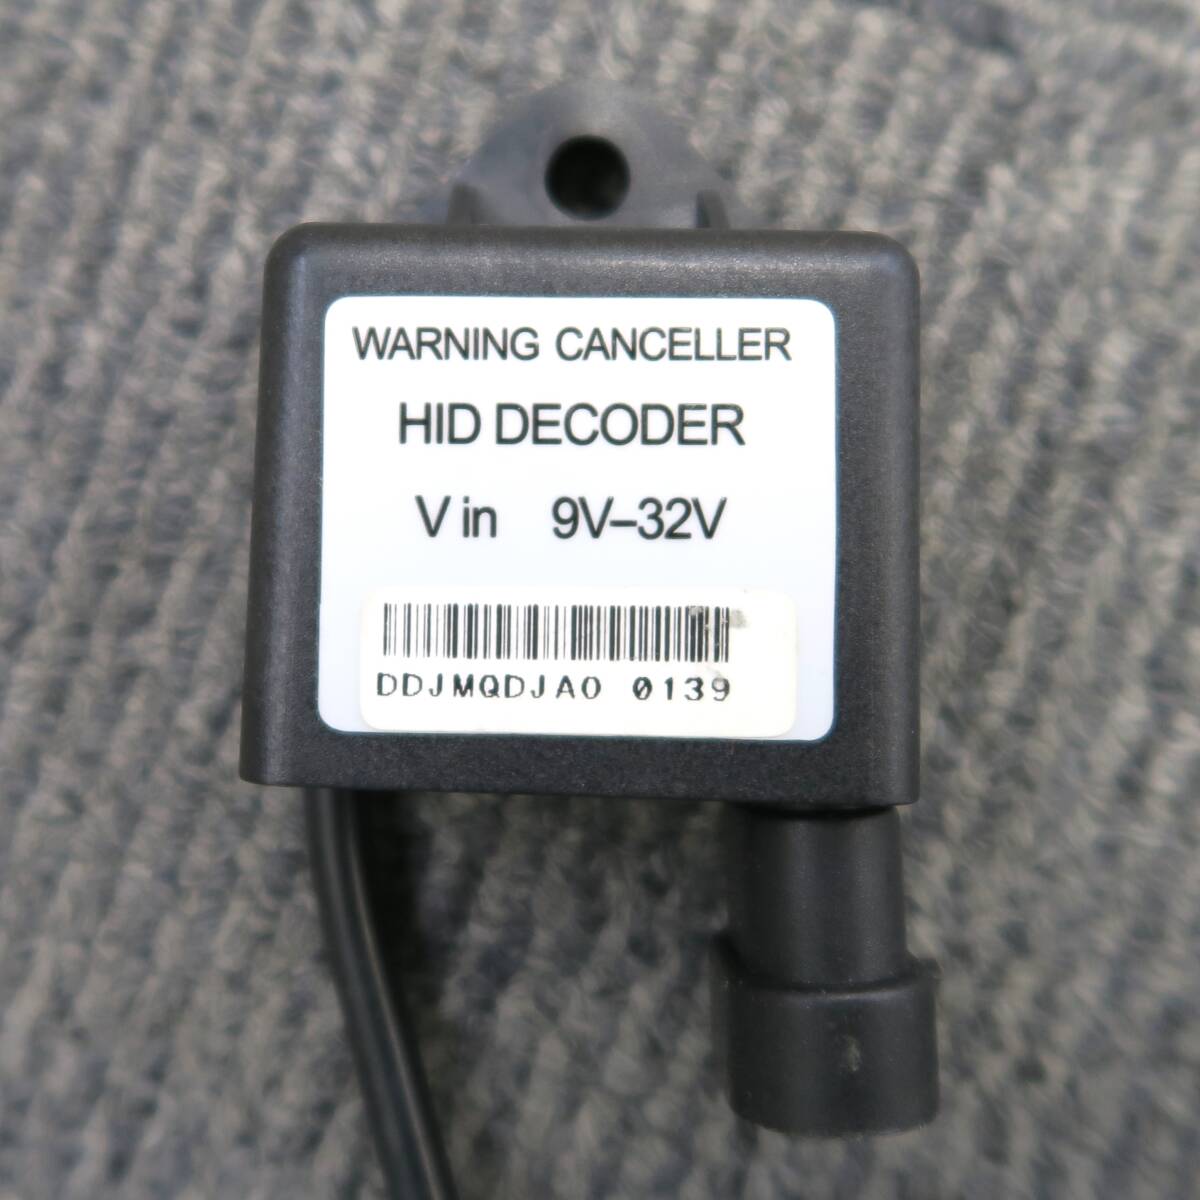 4 point together HID xenon discharge light imported car both for warning light warning canceller resistance DECODER* unused anonymity delivery free shipping 